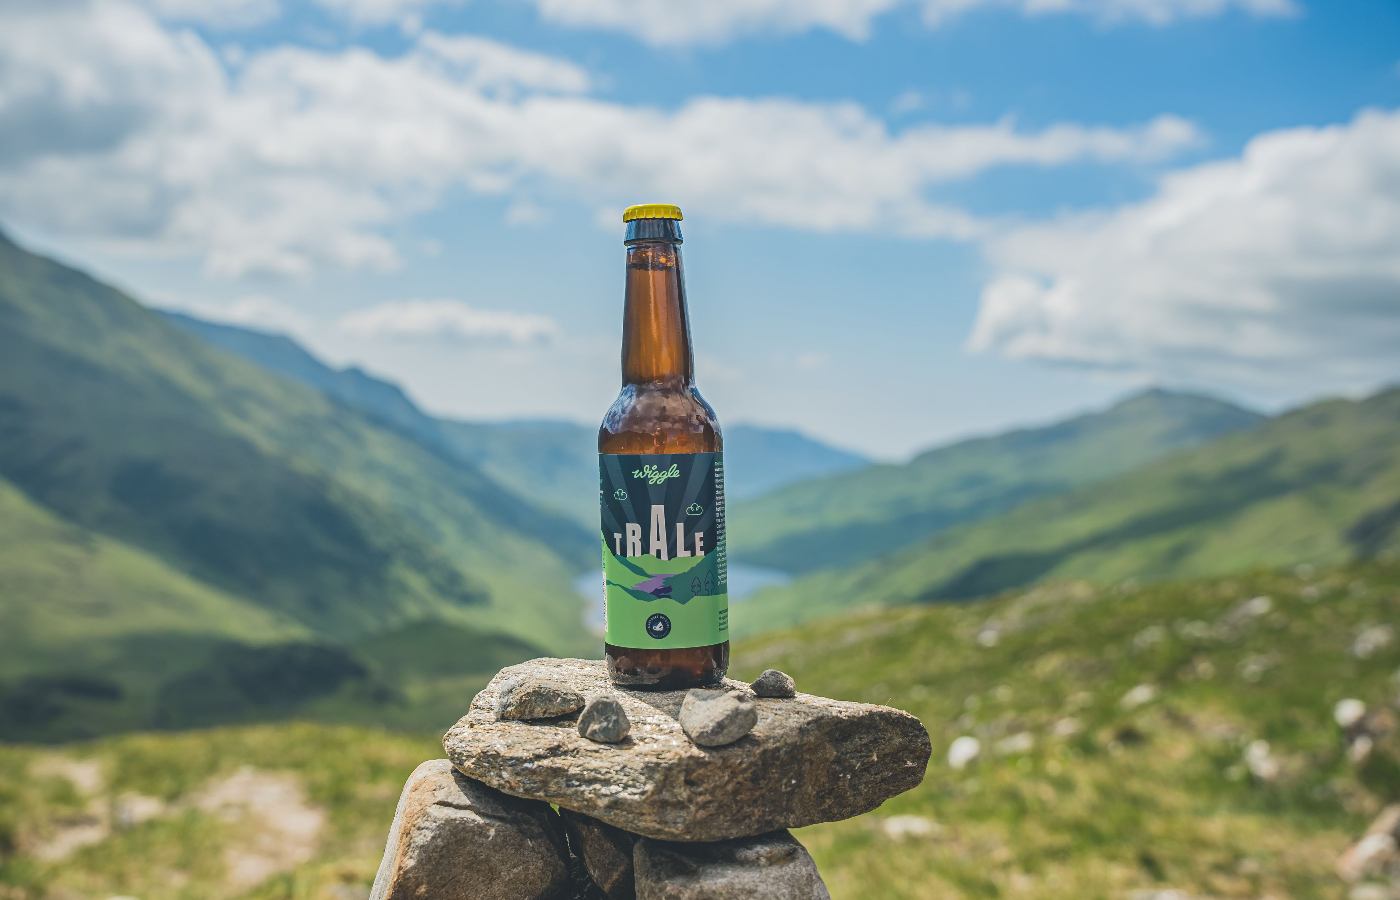 Upon reaching the pub, hikers will just need to say 'Wiggle' to get a complimentary taste of the beer.